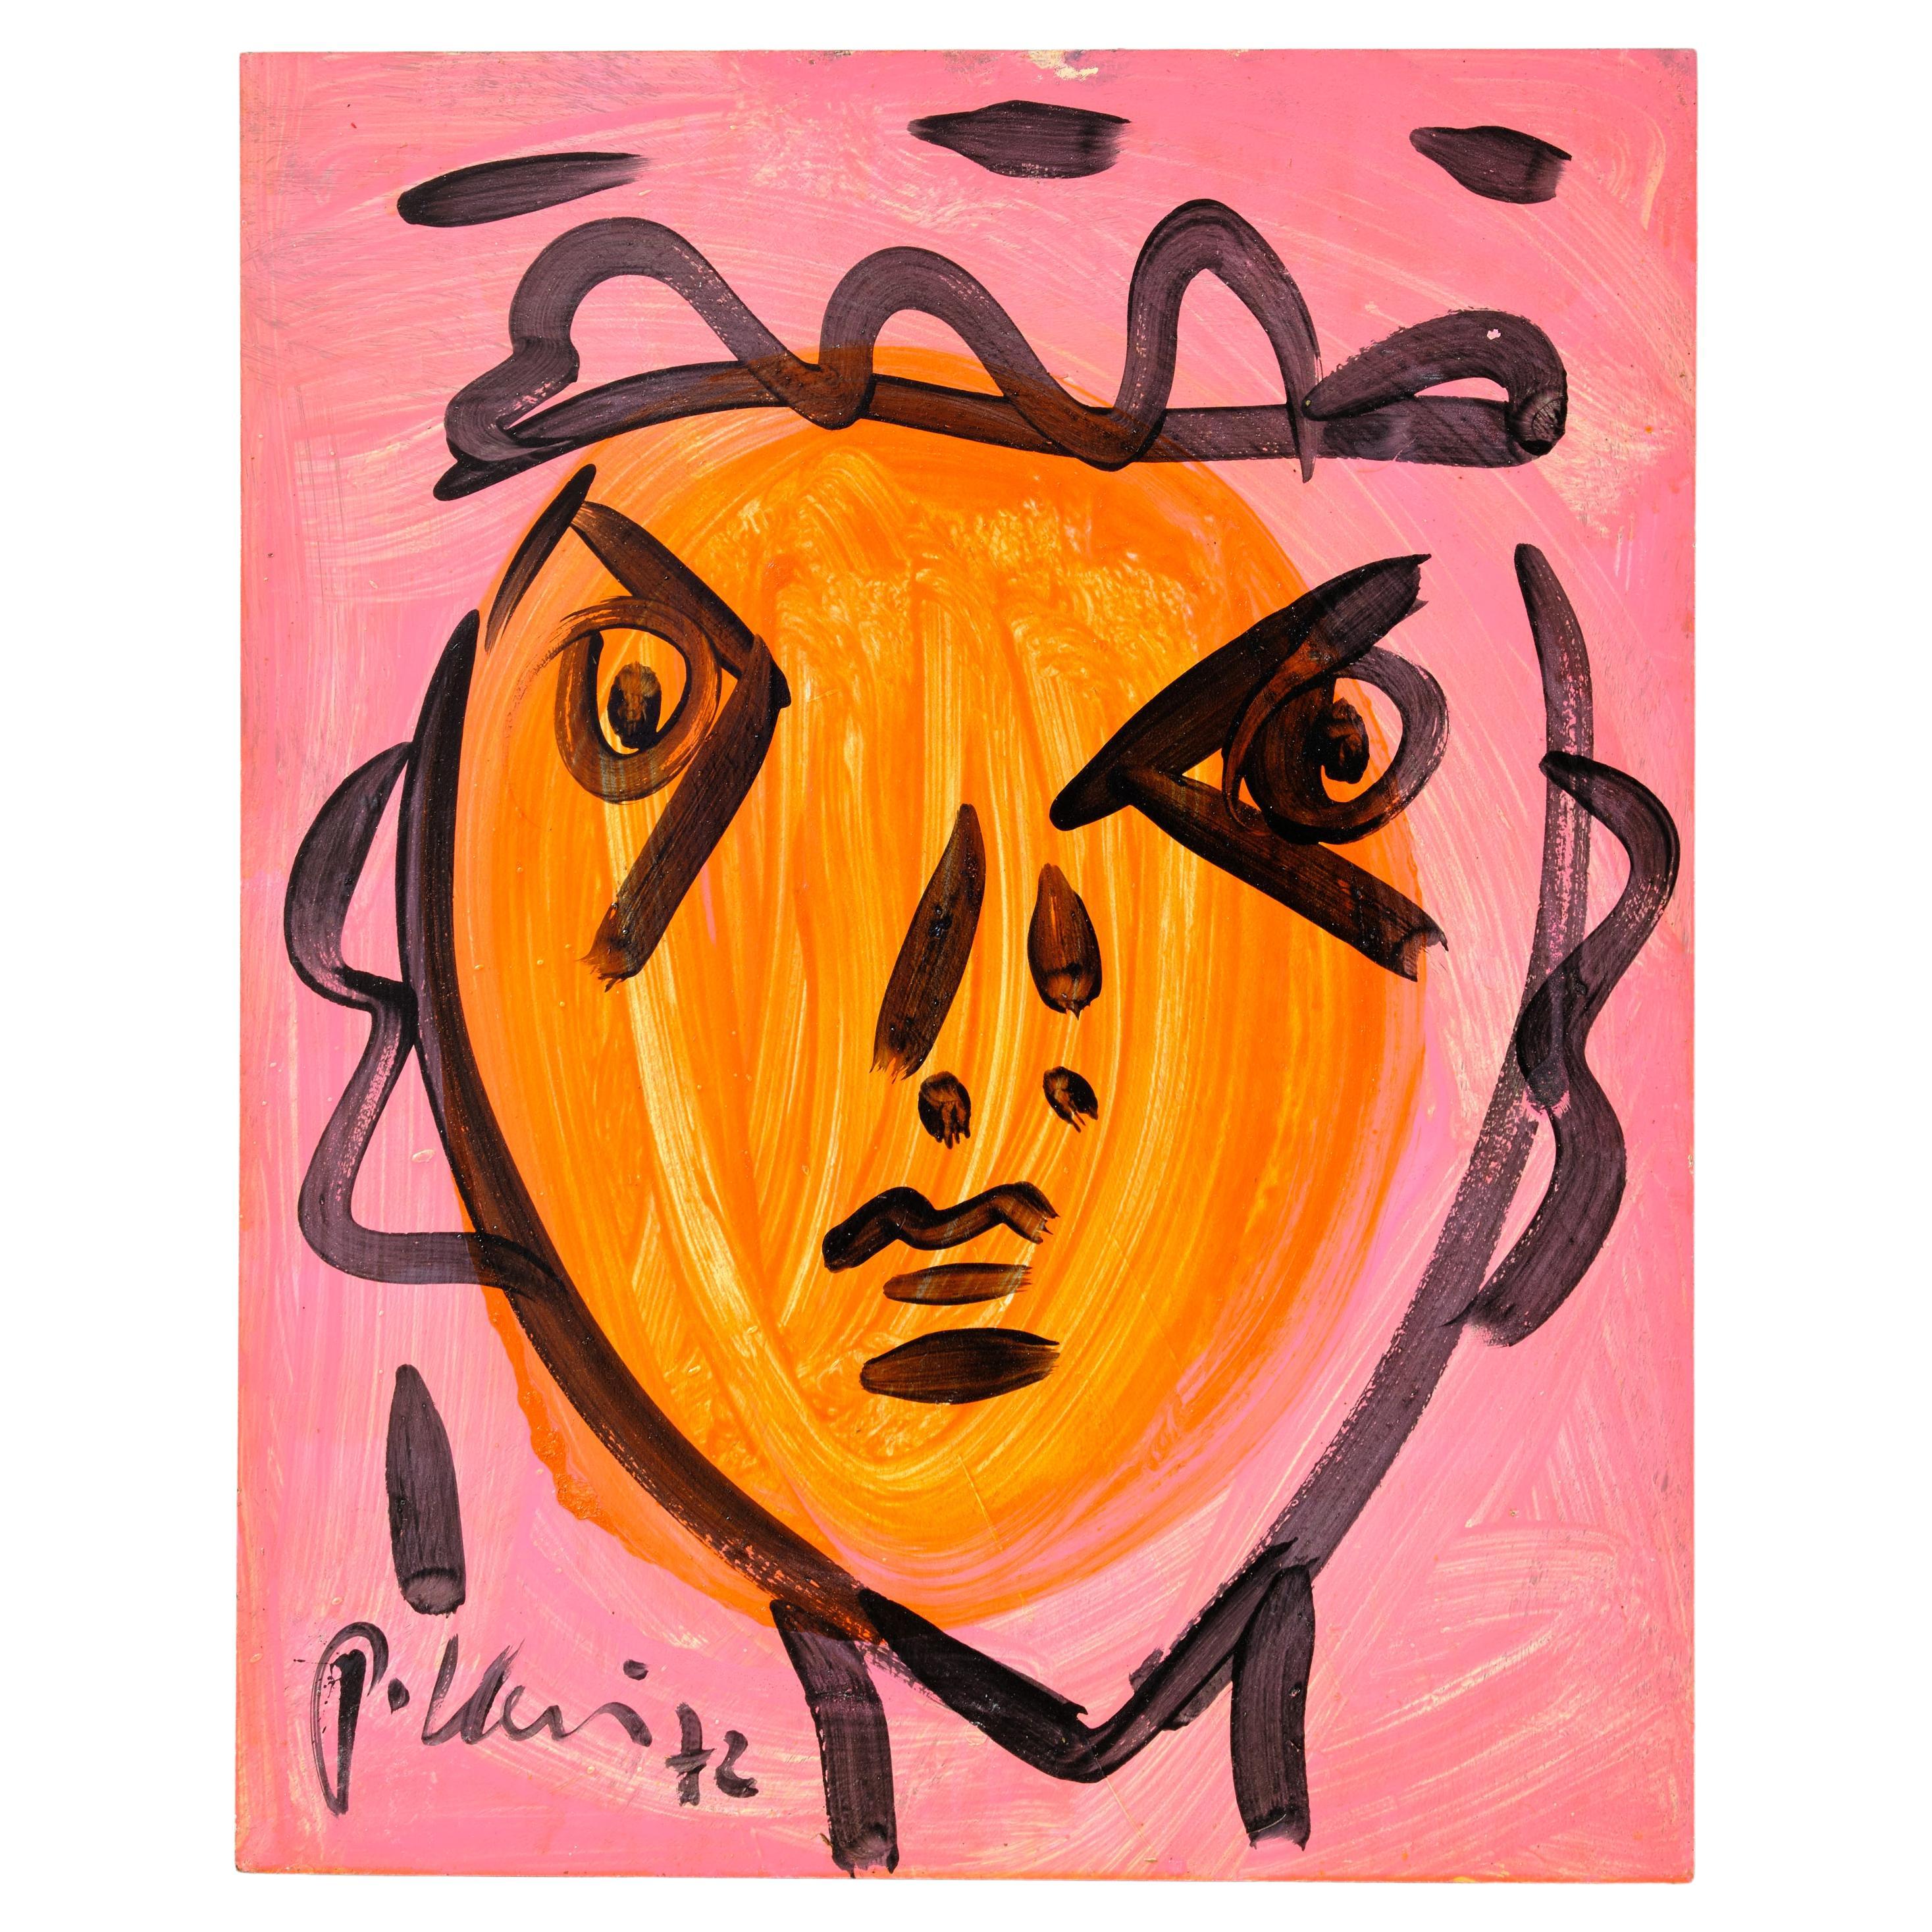 Painting by Peter Keil circa 1972 Pink and Orange Painted on Board Modern Art